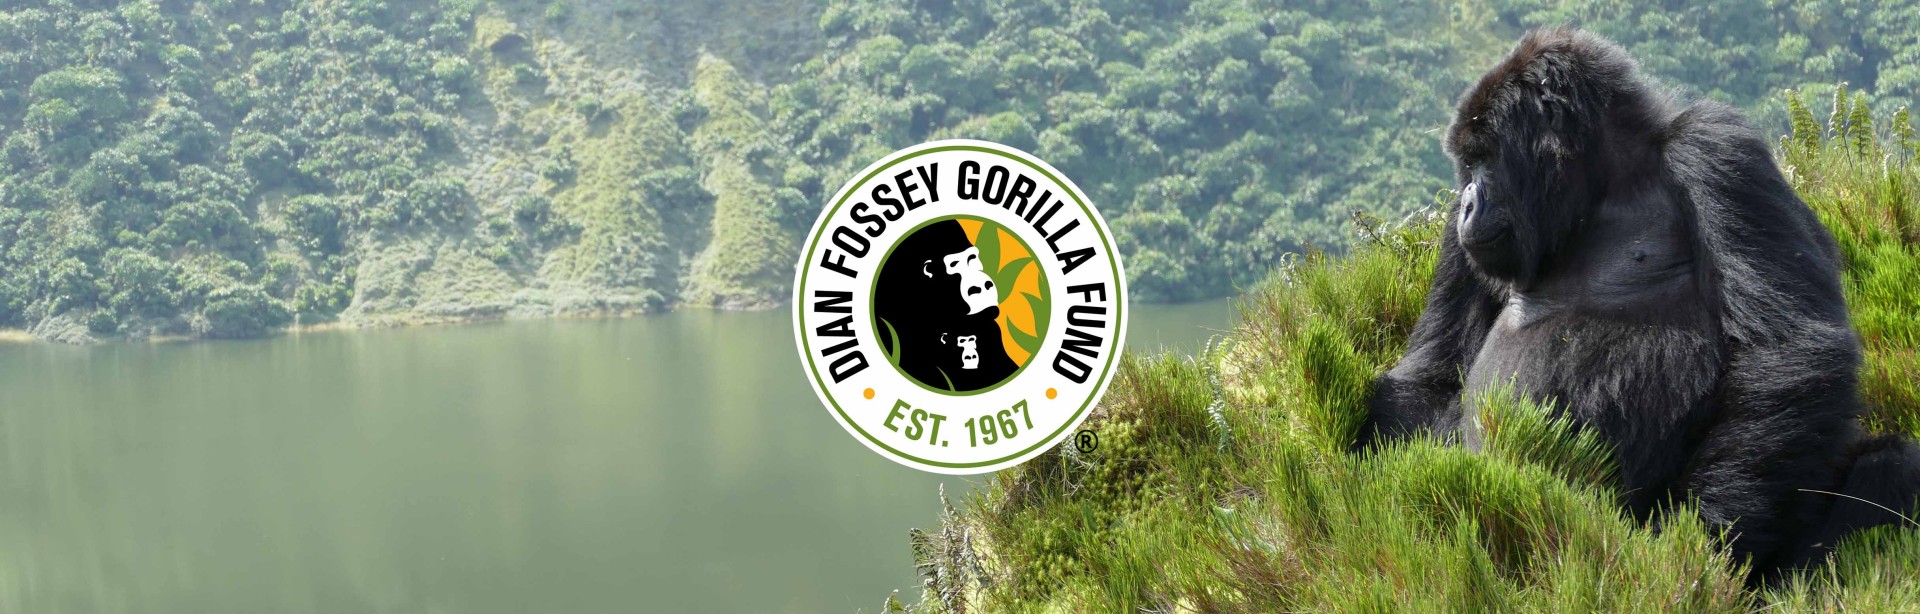 Fundraise for the Dian Fossey Gorilla Fund